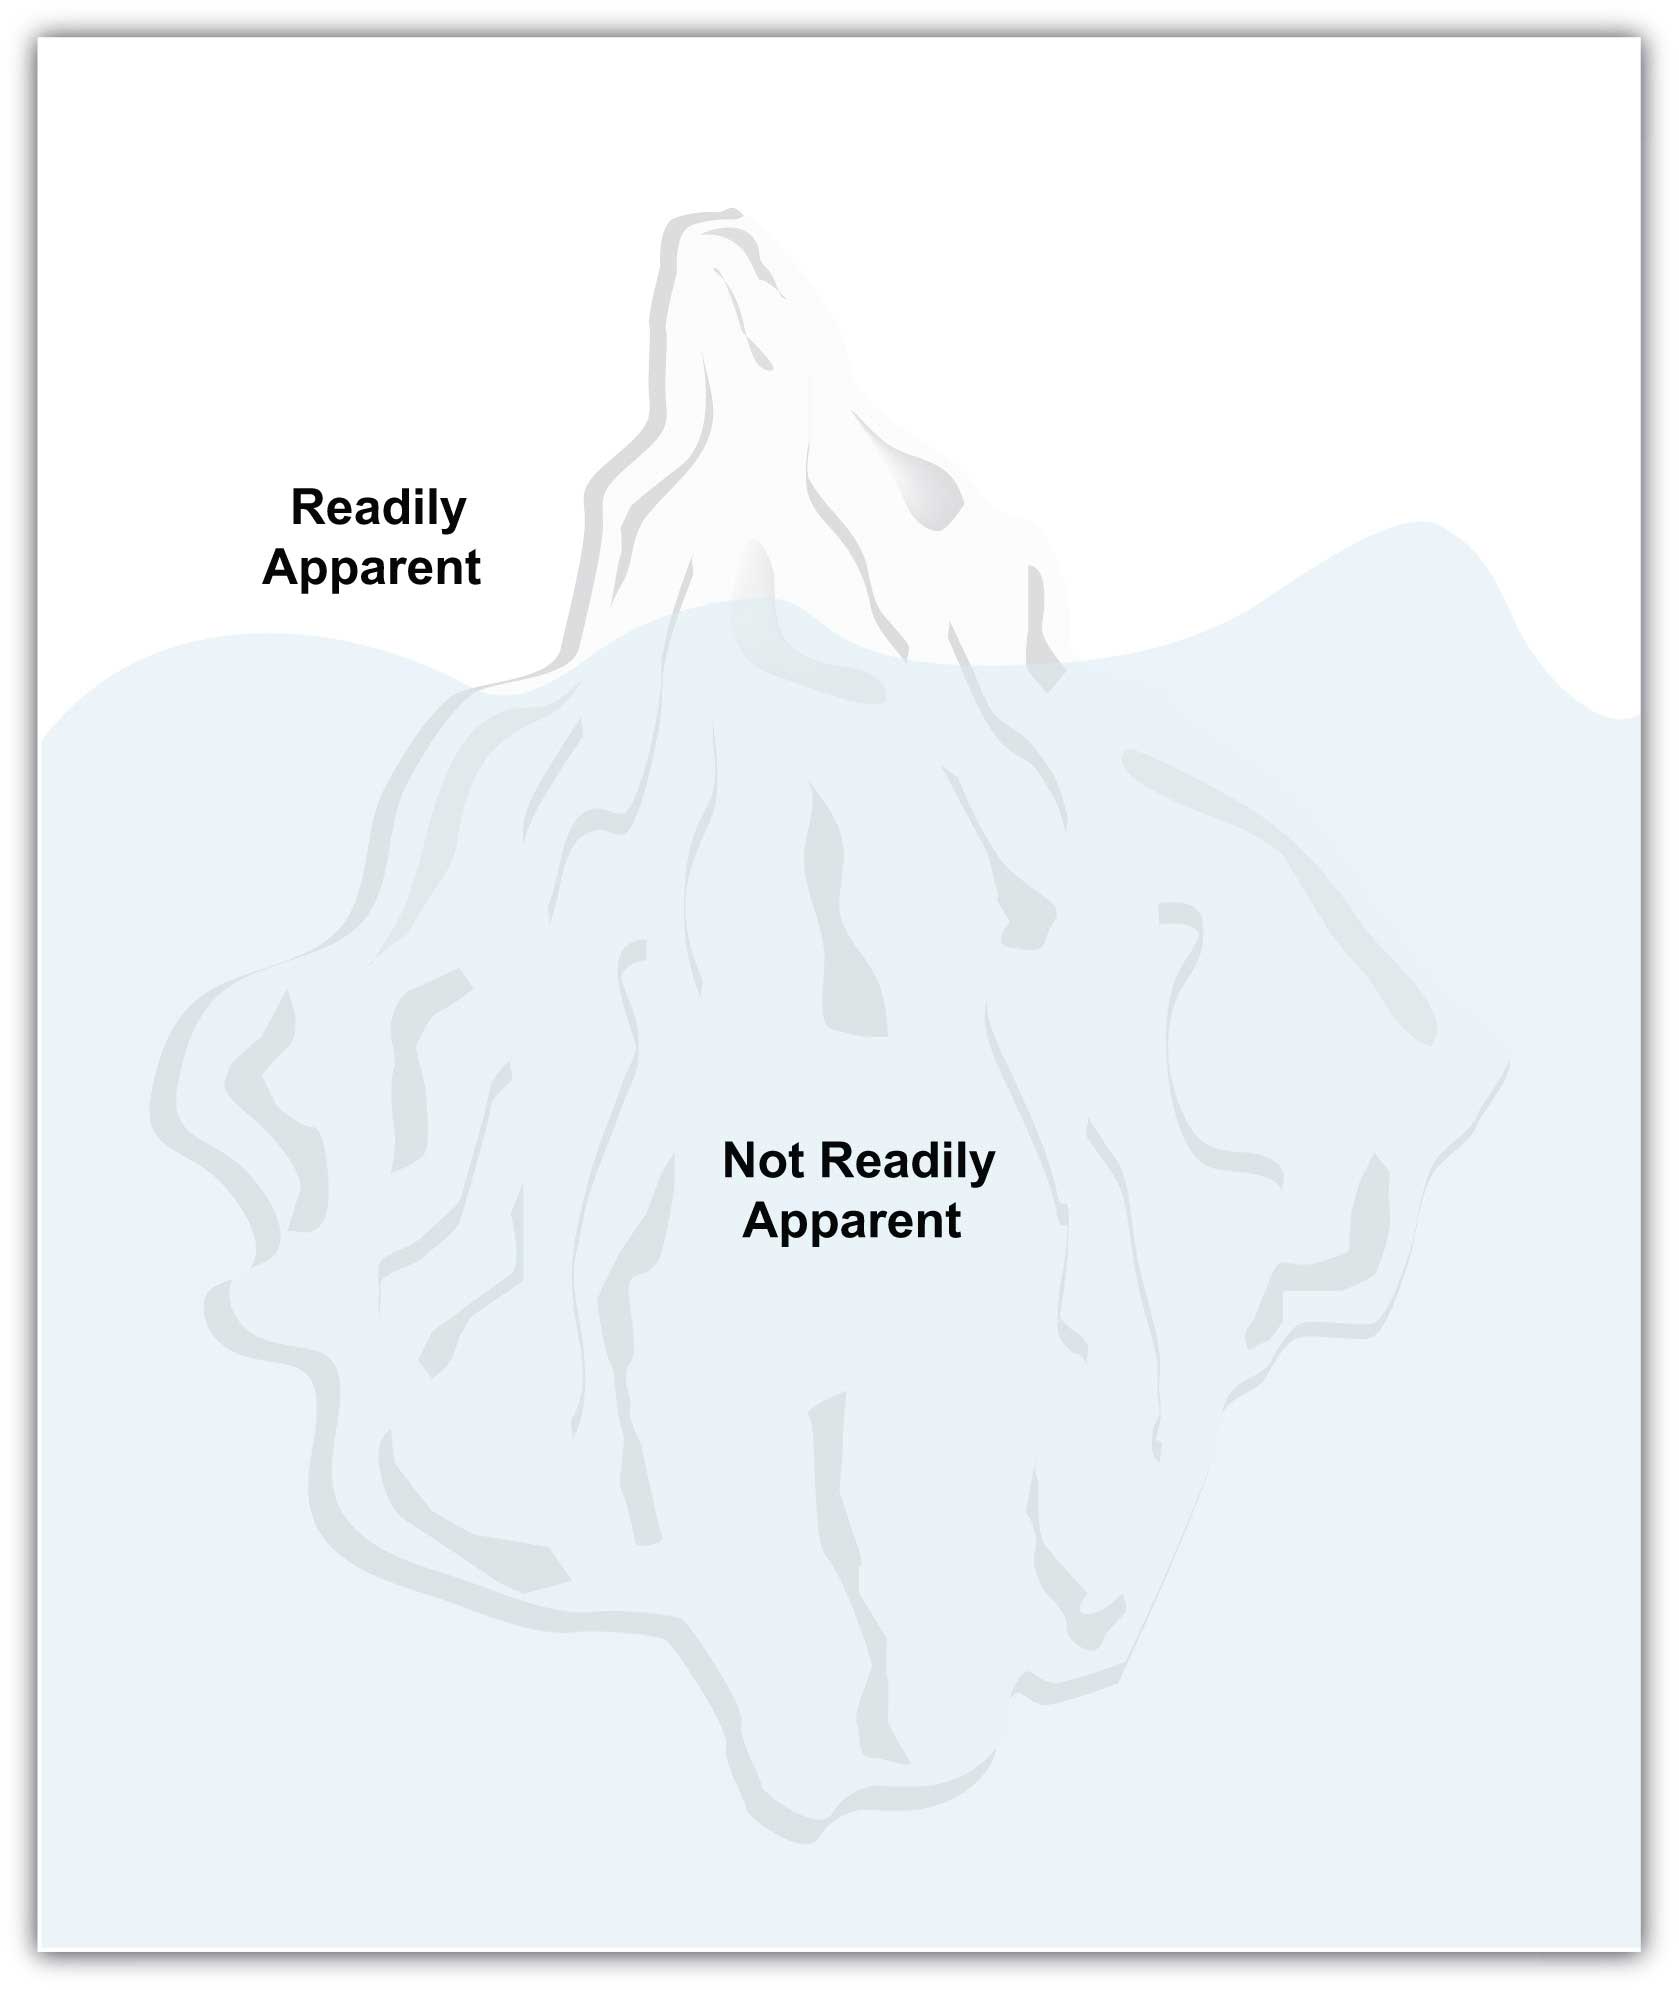 Descriptive image showing an entire iceberg, with only the tip readily apparent above the water line. Most of the iceberg is under water, and therefore not readily apparent.